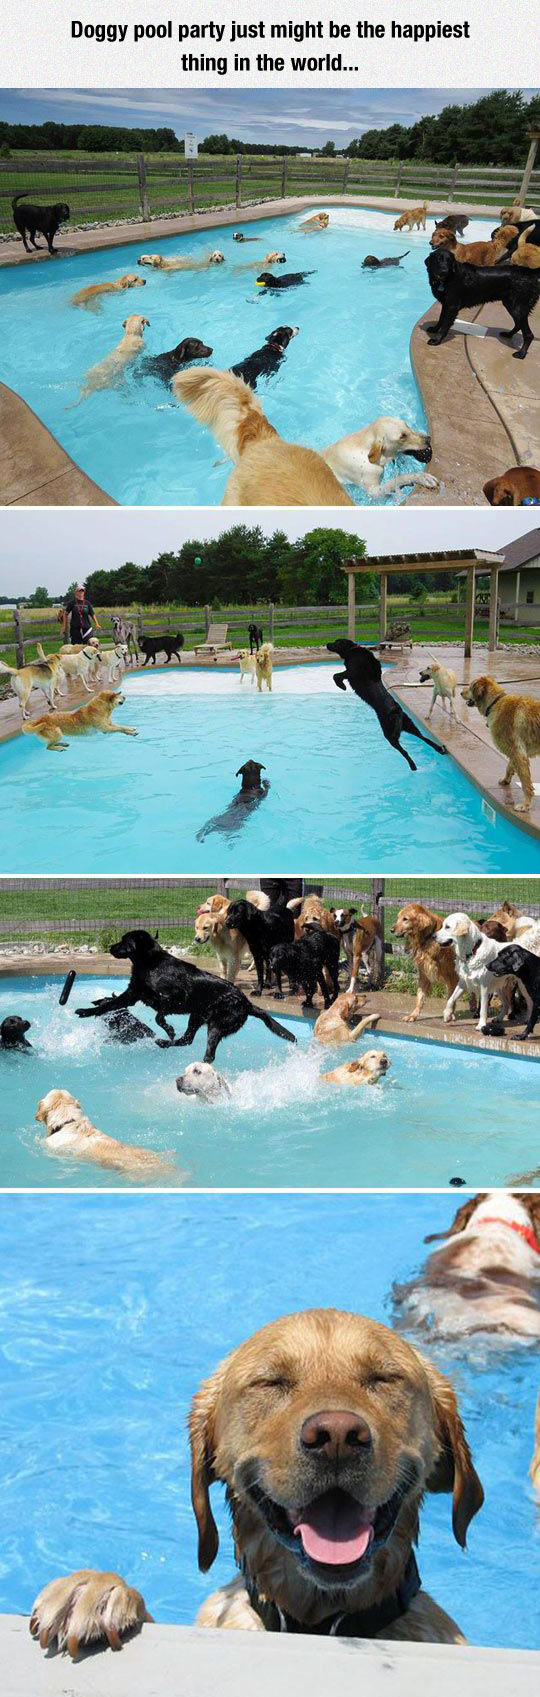 water - Doggy pool party just might be the happiest thing in the world... Baks adid